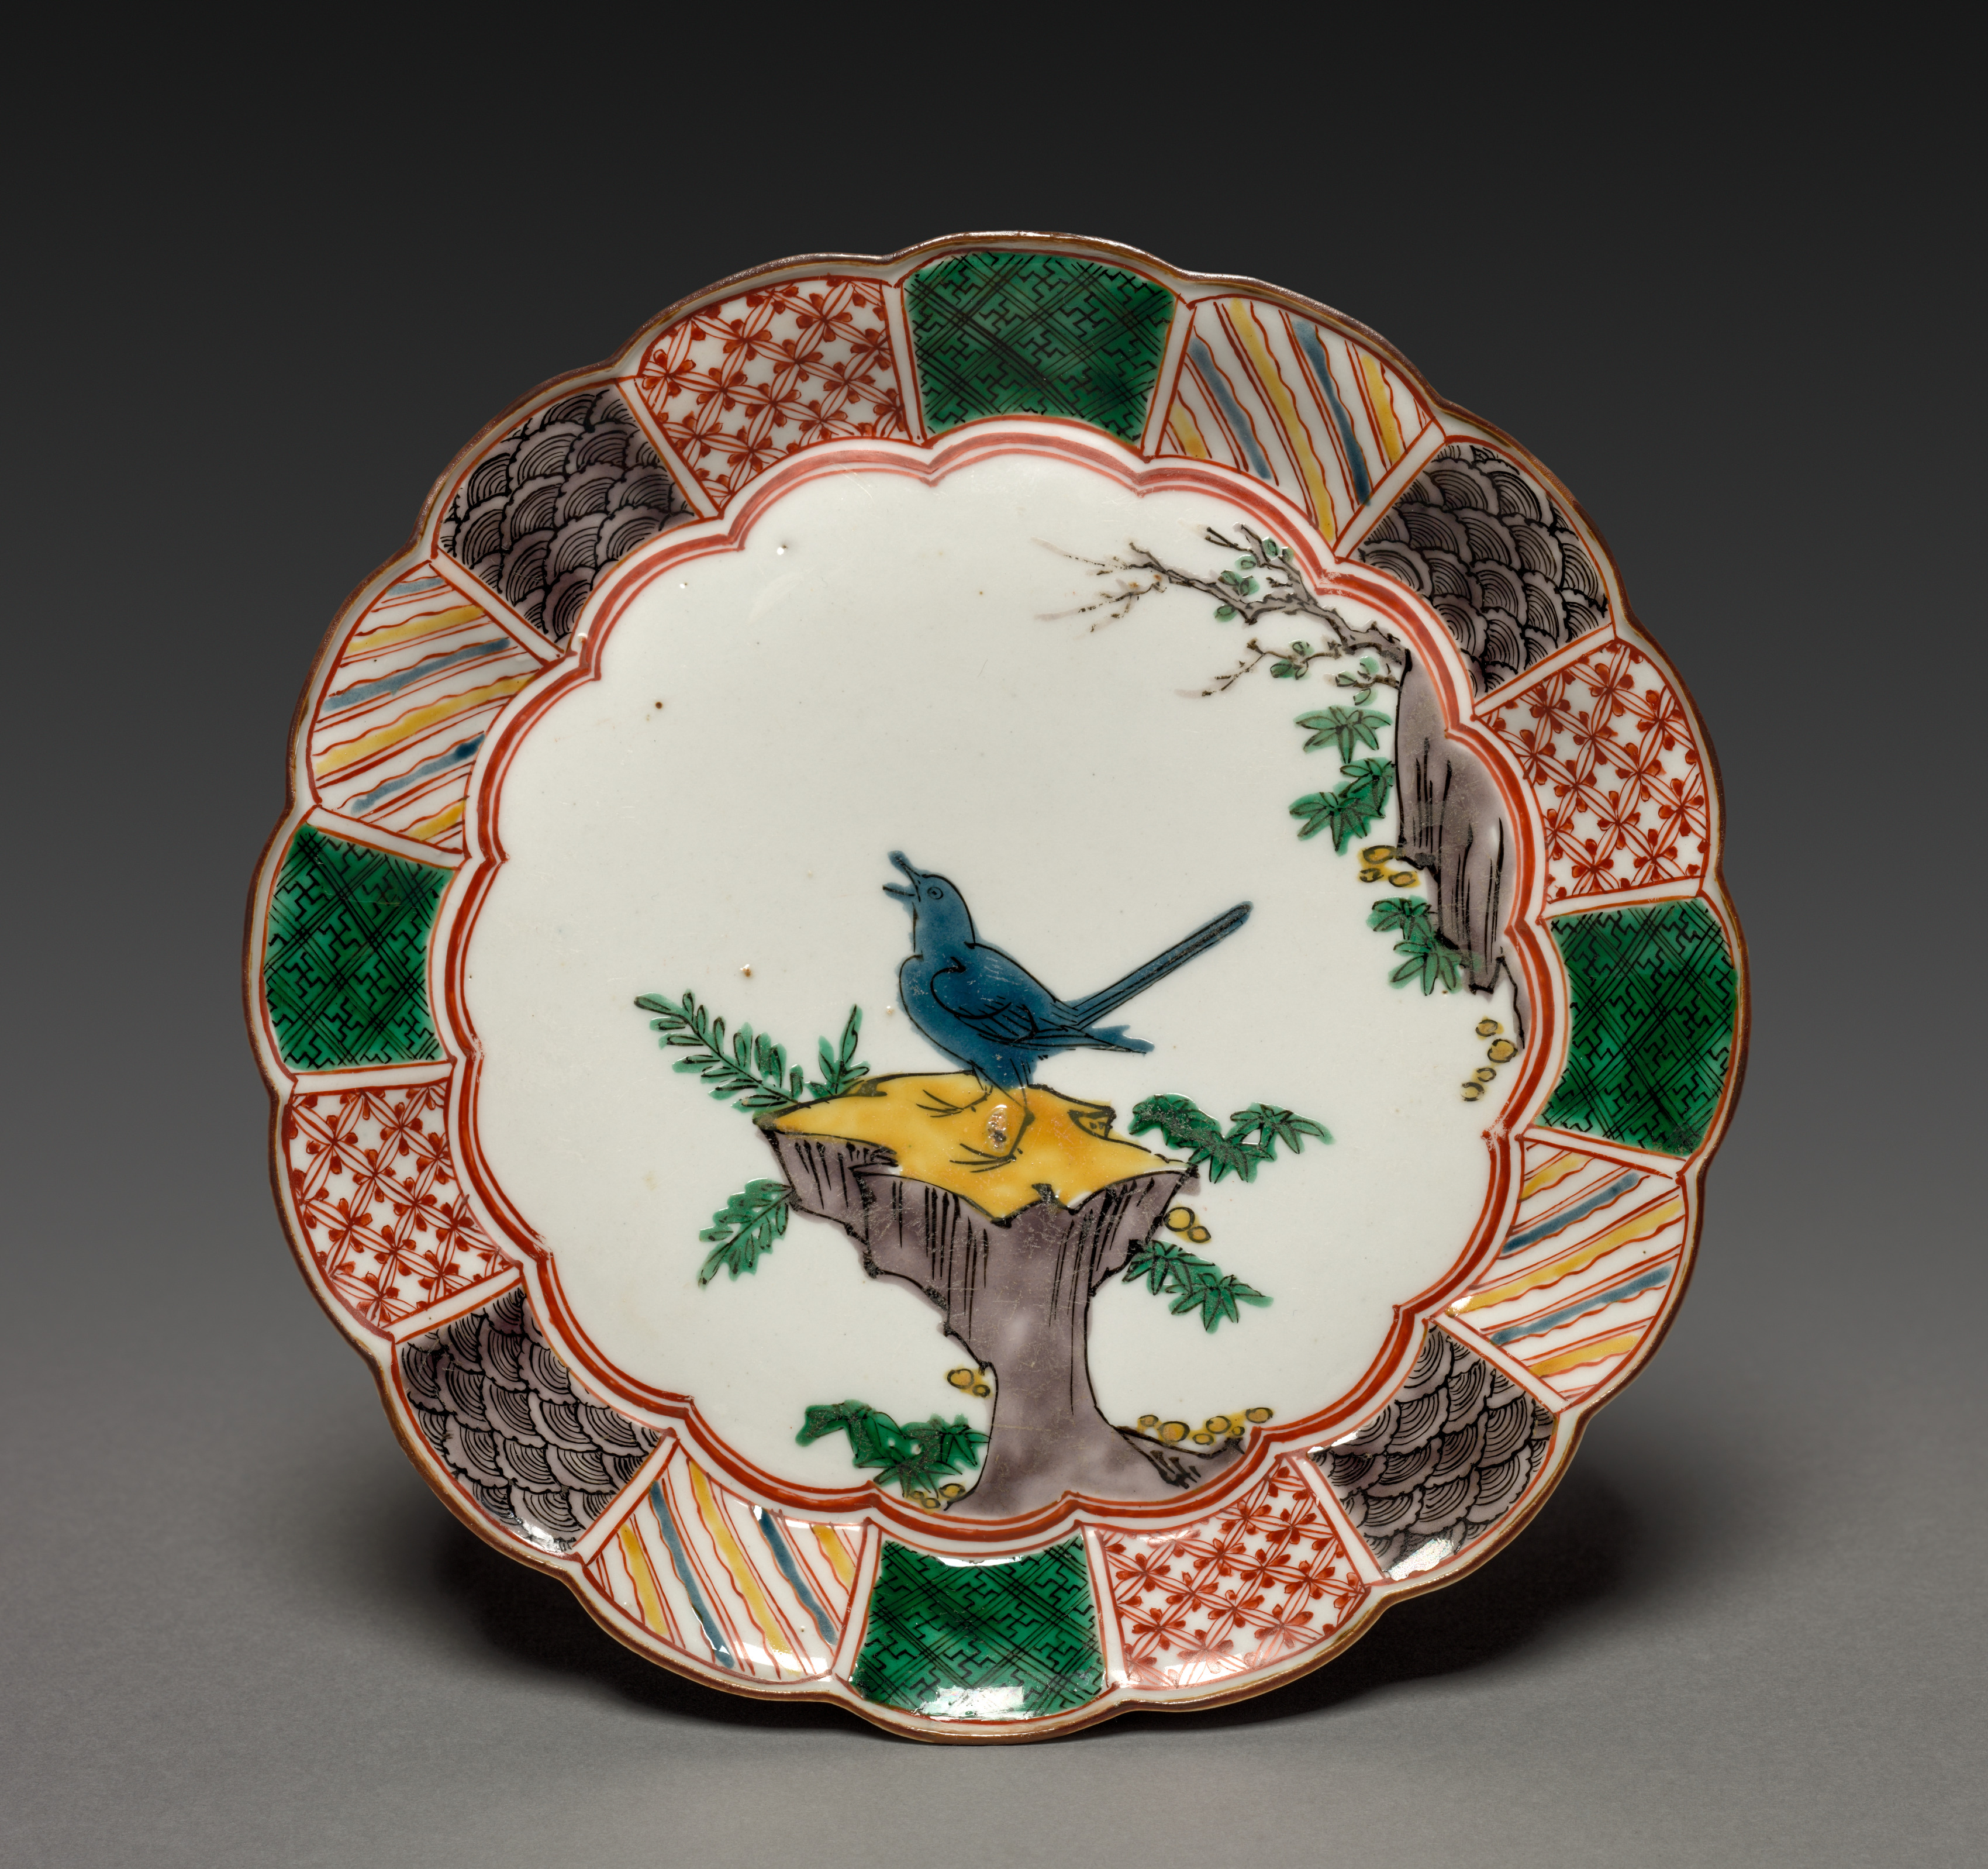 Dish with Singing Bird on a Rock